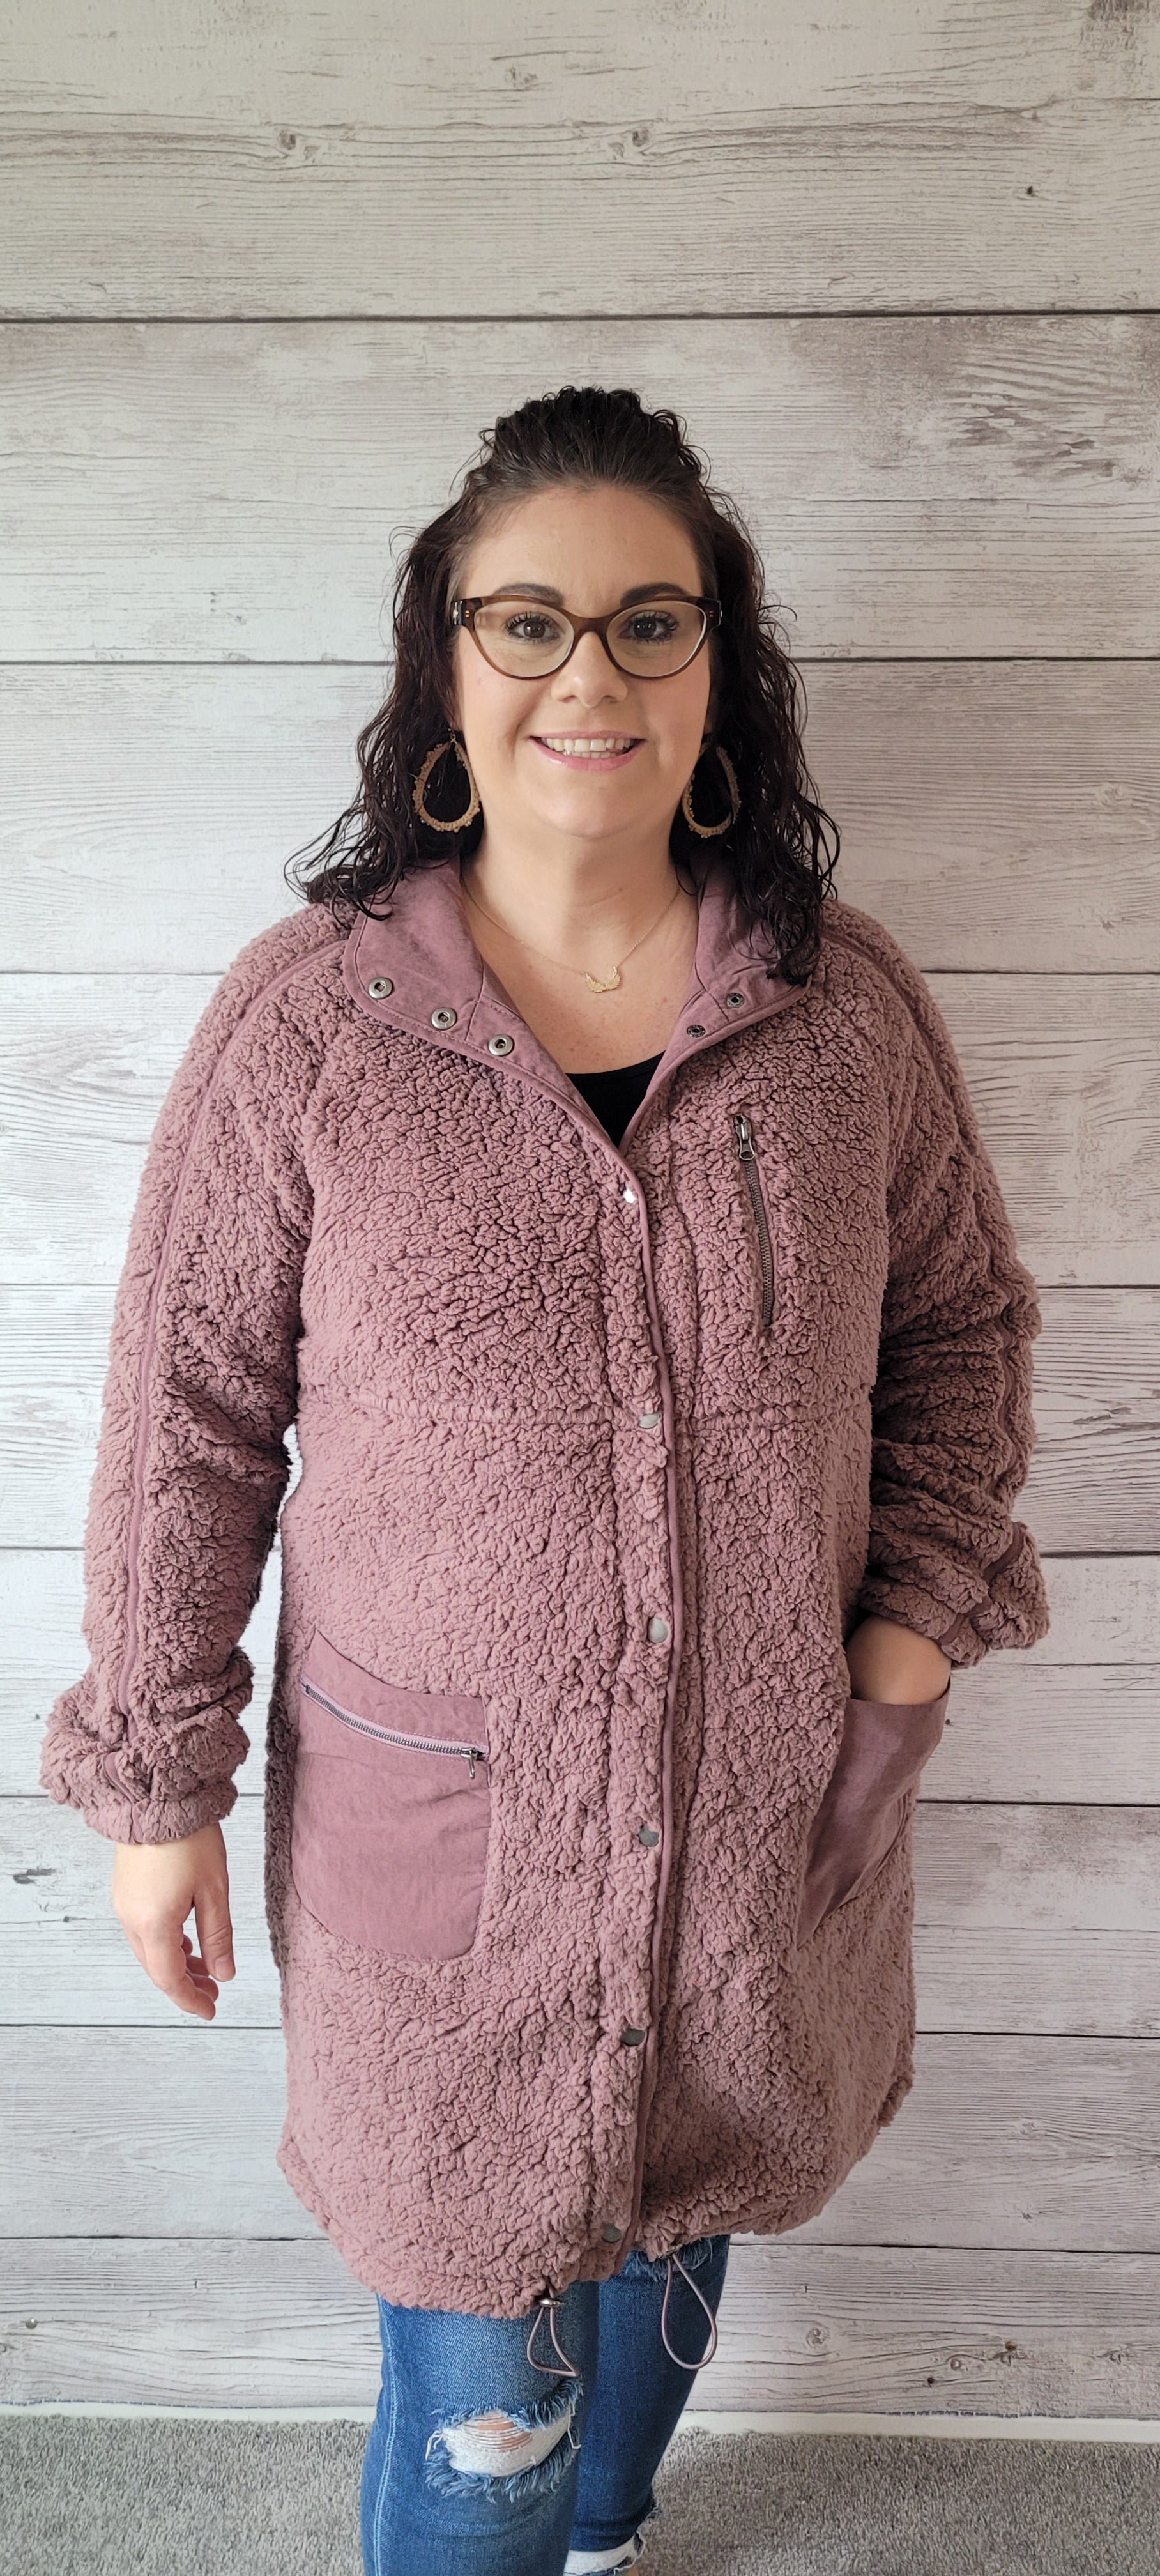 Keep snug and stay stylish with the "Maggie Mauve Fleece Jacket"! With metal snap button front closure, zippered pockets, contrast trim, and drawstring hem, you'll look totally 'snow'-tastic! Cozy up and stay oh-so chic! Sizes small through large.